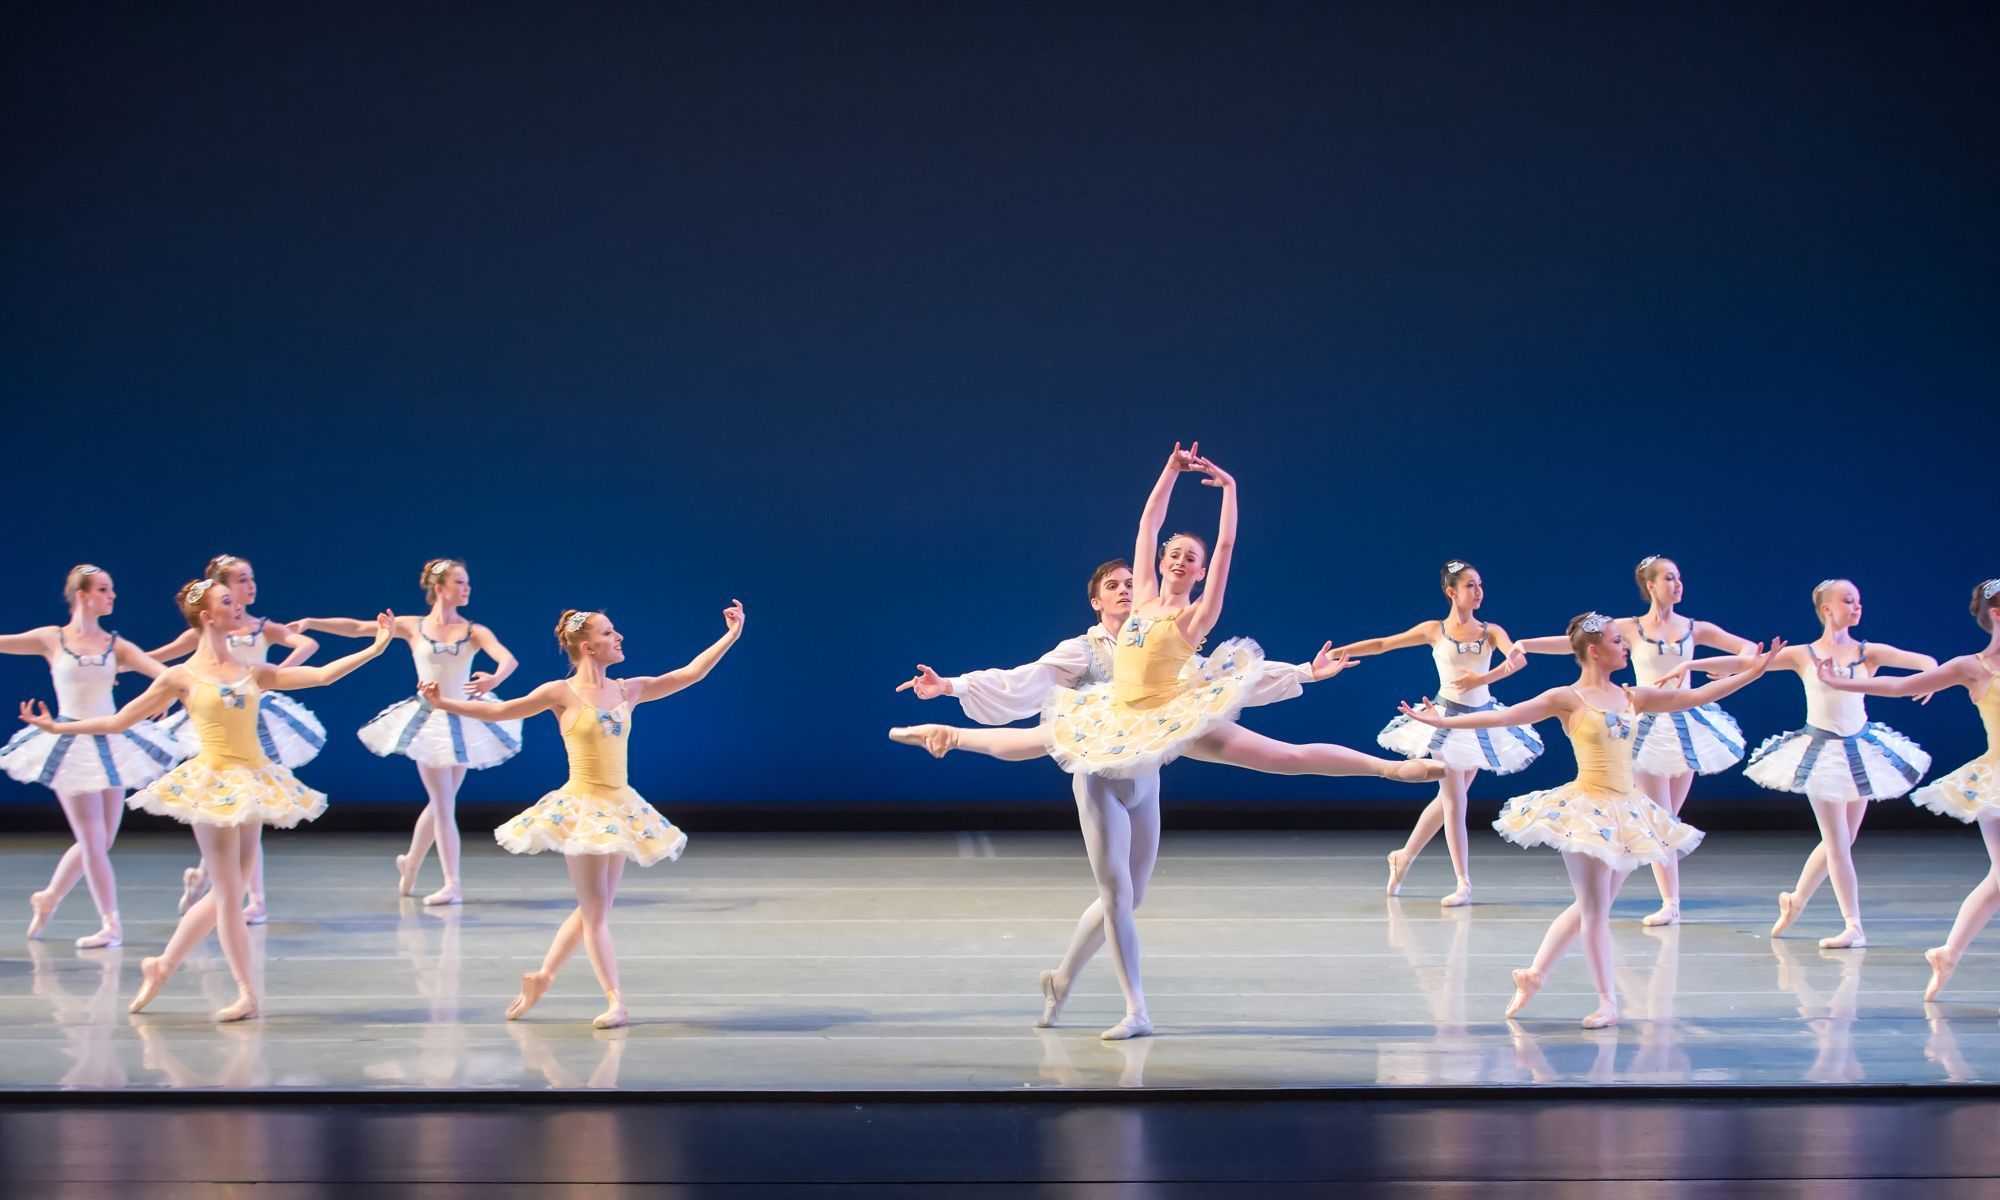 A group of ballerinas performing on stage.